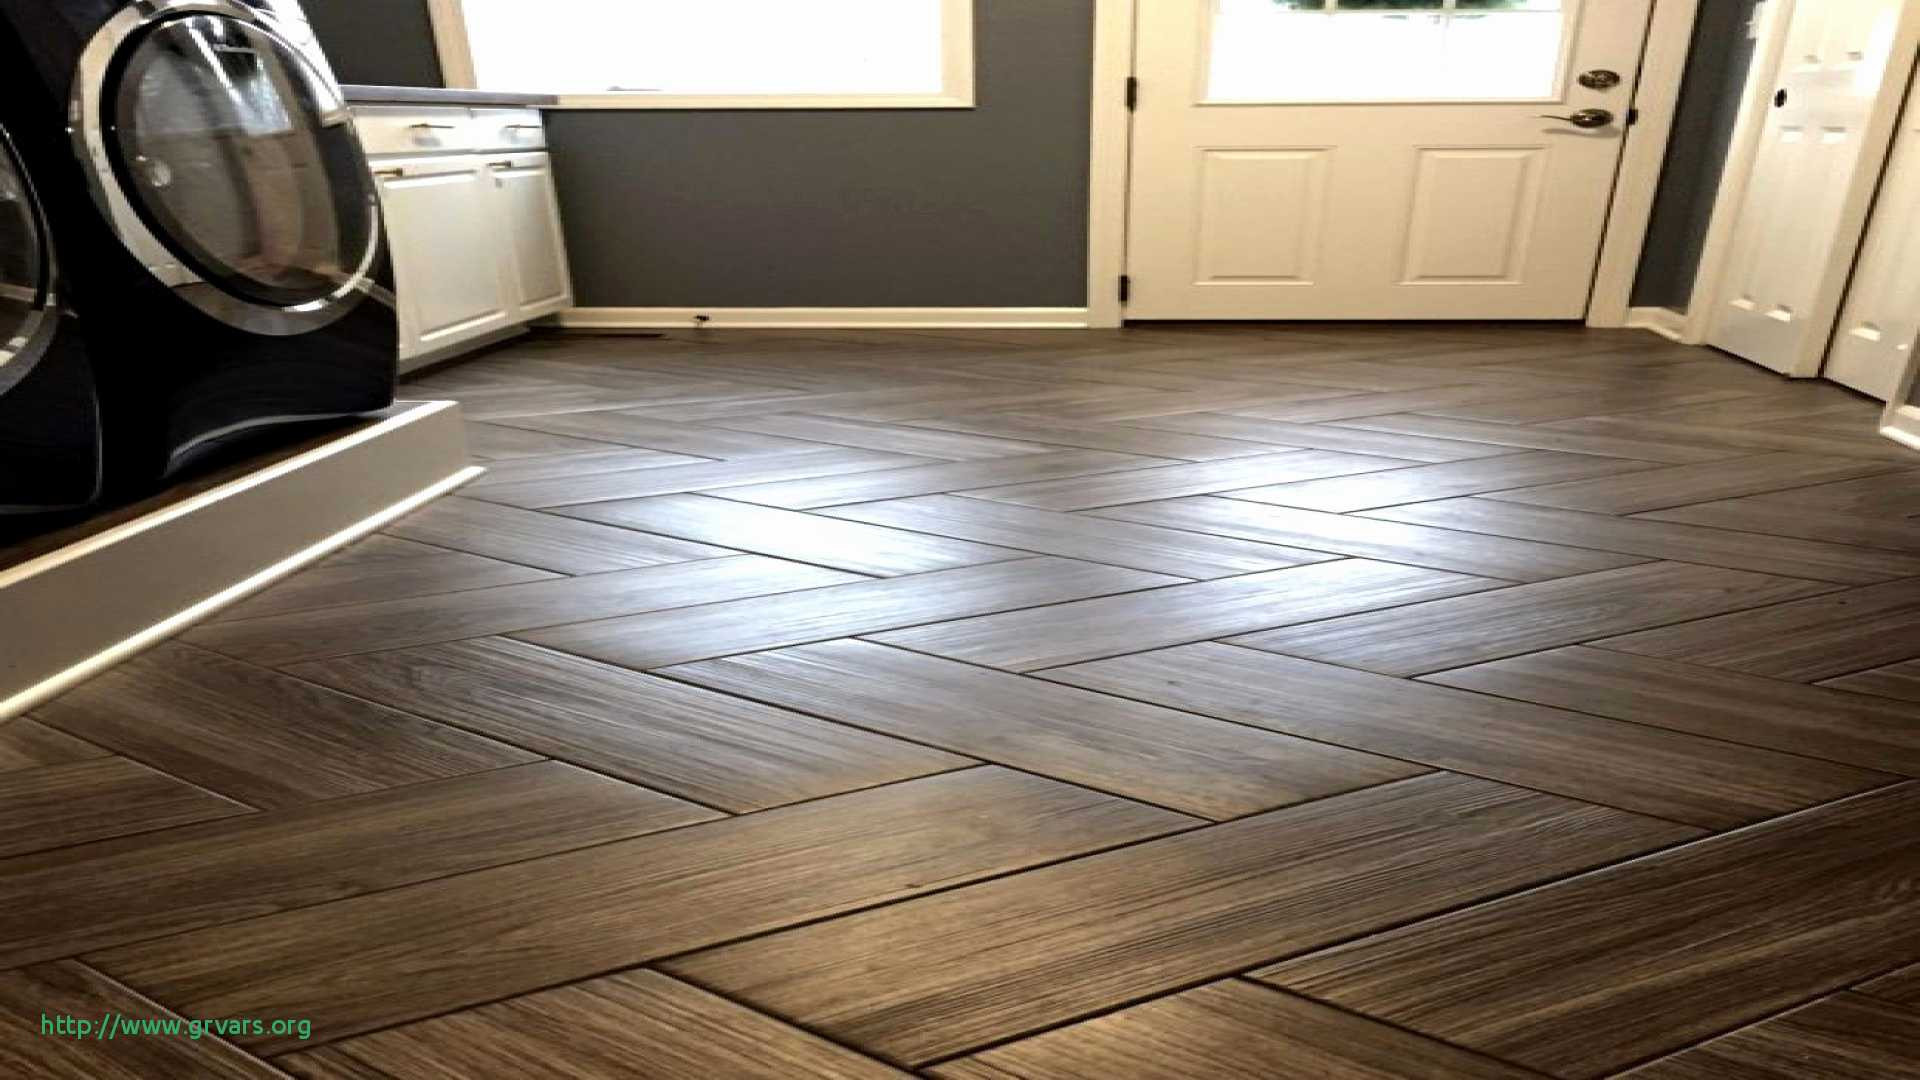 23 Awesome Price to Install Hardwood Floors Home Depot 2024 free download price to install hardwood floors home depot of 20 luxe how are hardwood floors installed ideas blog for kitchen floor tiles home depot elegant s media cache ak0 pinimg 736x 43 0d 97 best 50 